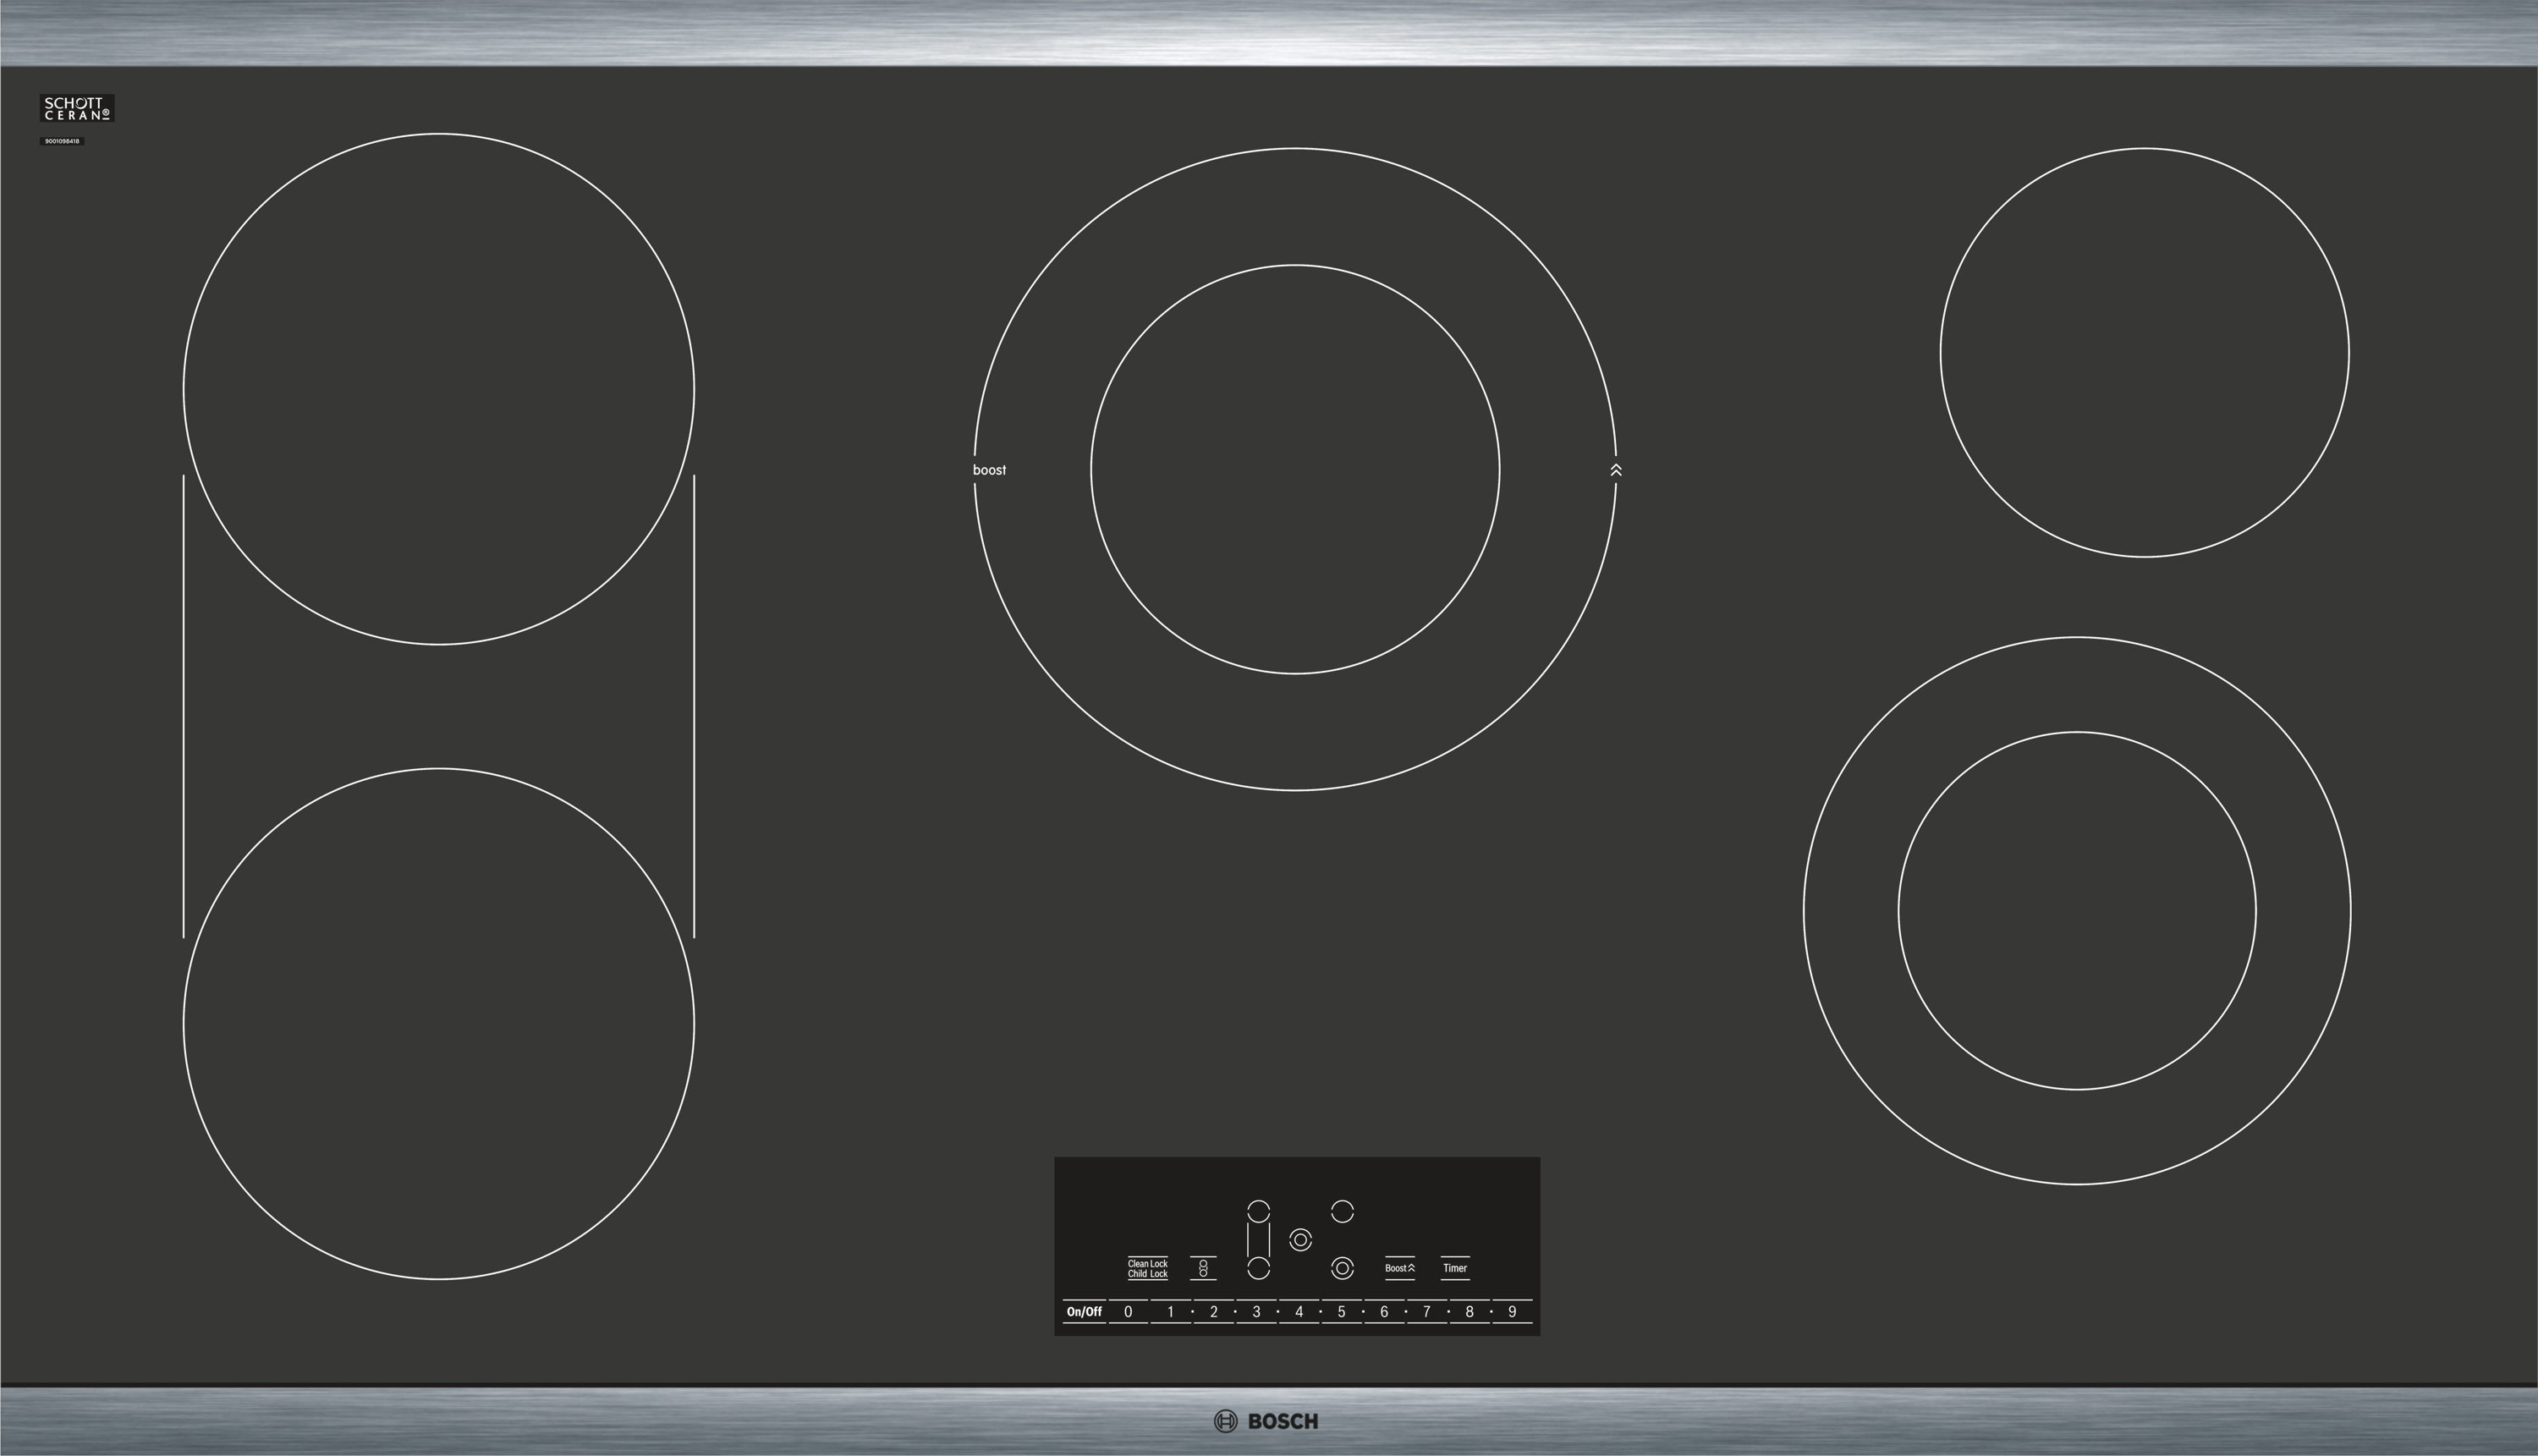 Bosch 800 Series 36 Built-In Electric Cooktop with 5 elements